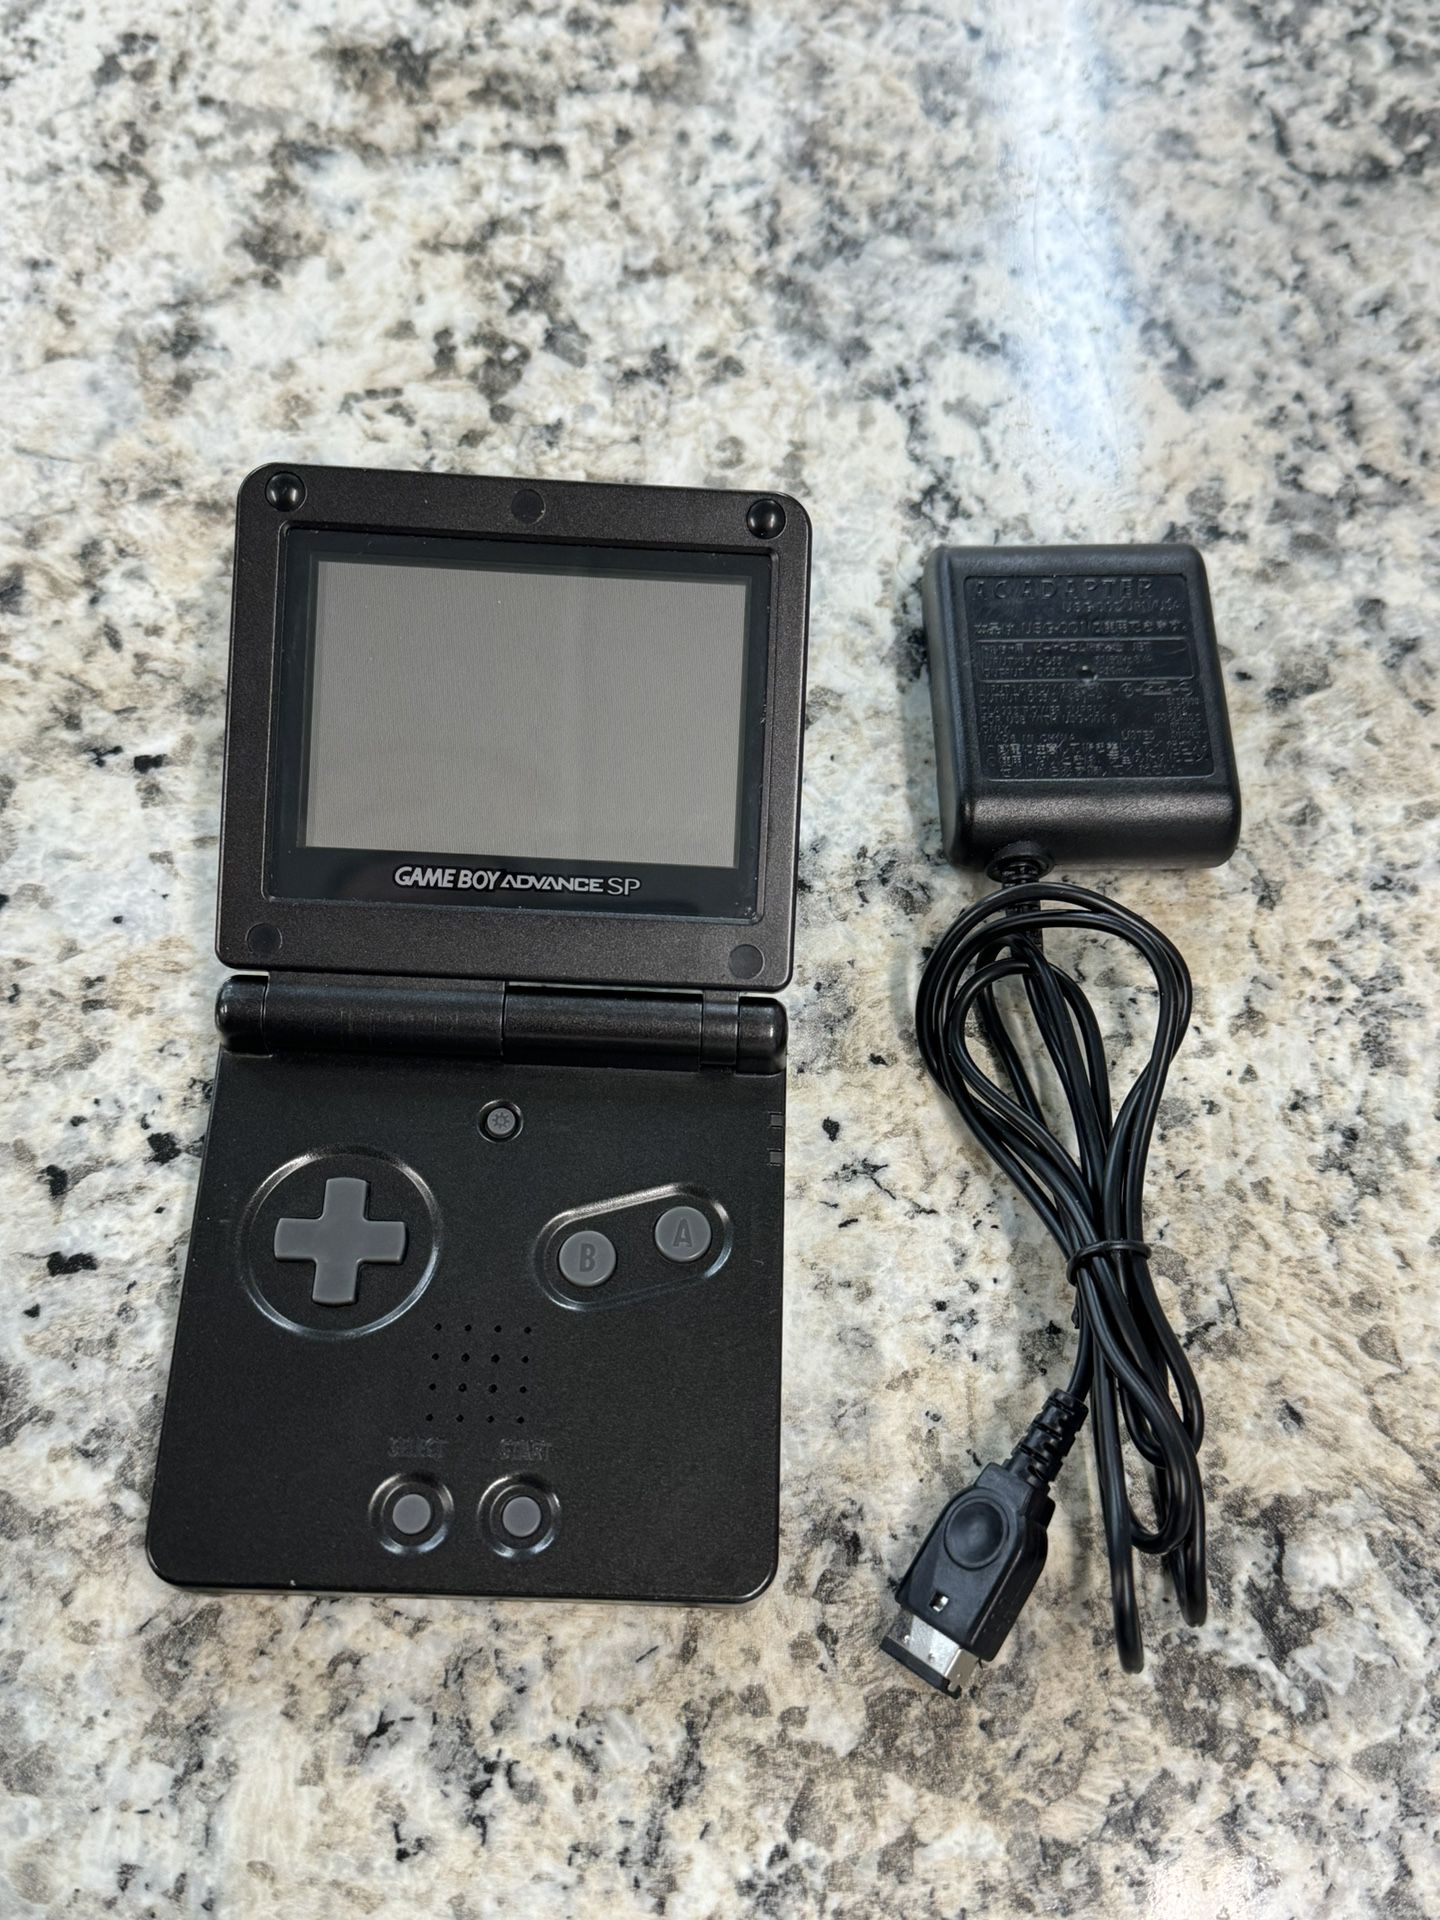 Nintendo Game Boy Advance SP AGS-001 Handheld System